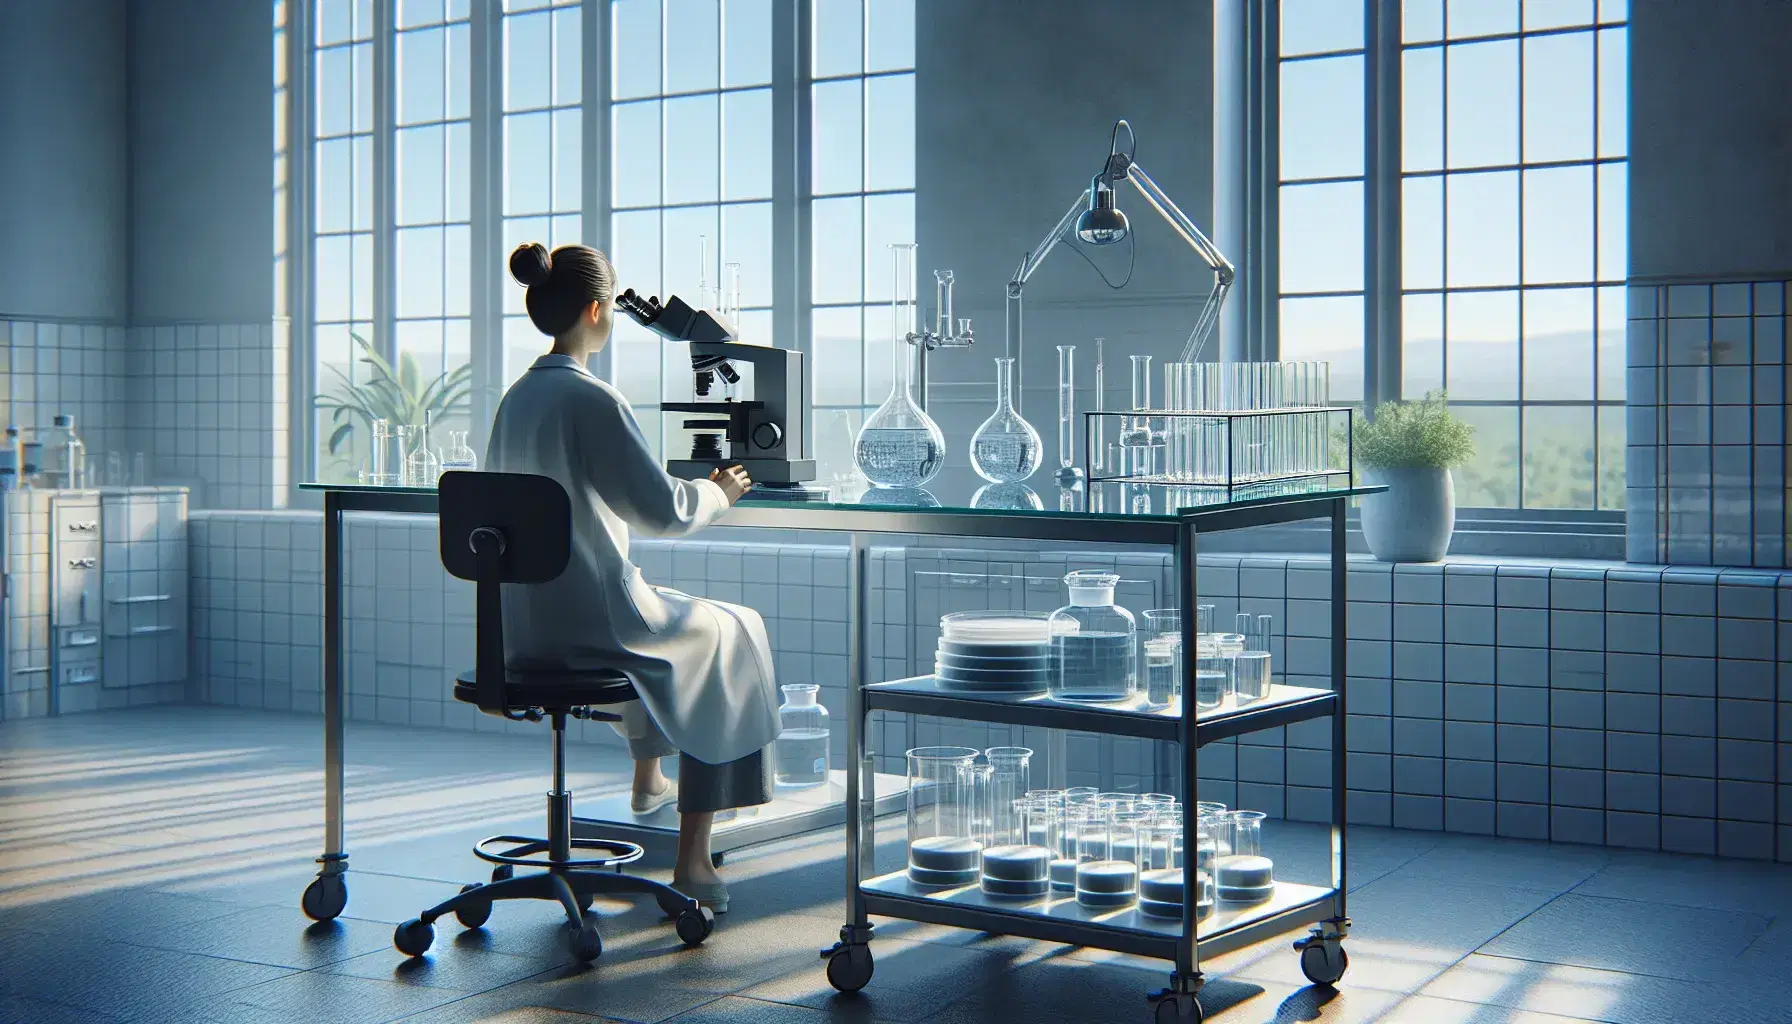 Bright laboratory with microscope, test tubes in blue rack, Petri dishes on glass table, scientist in lab coat analyzes liquid.